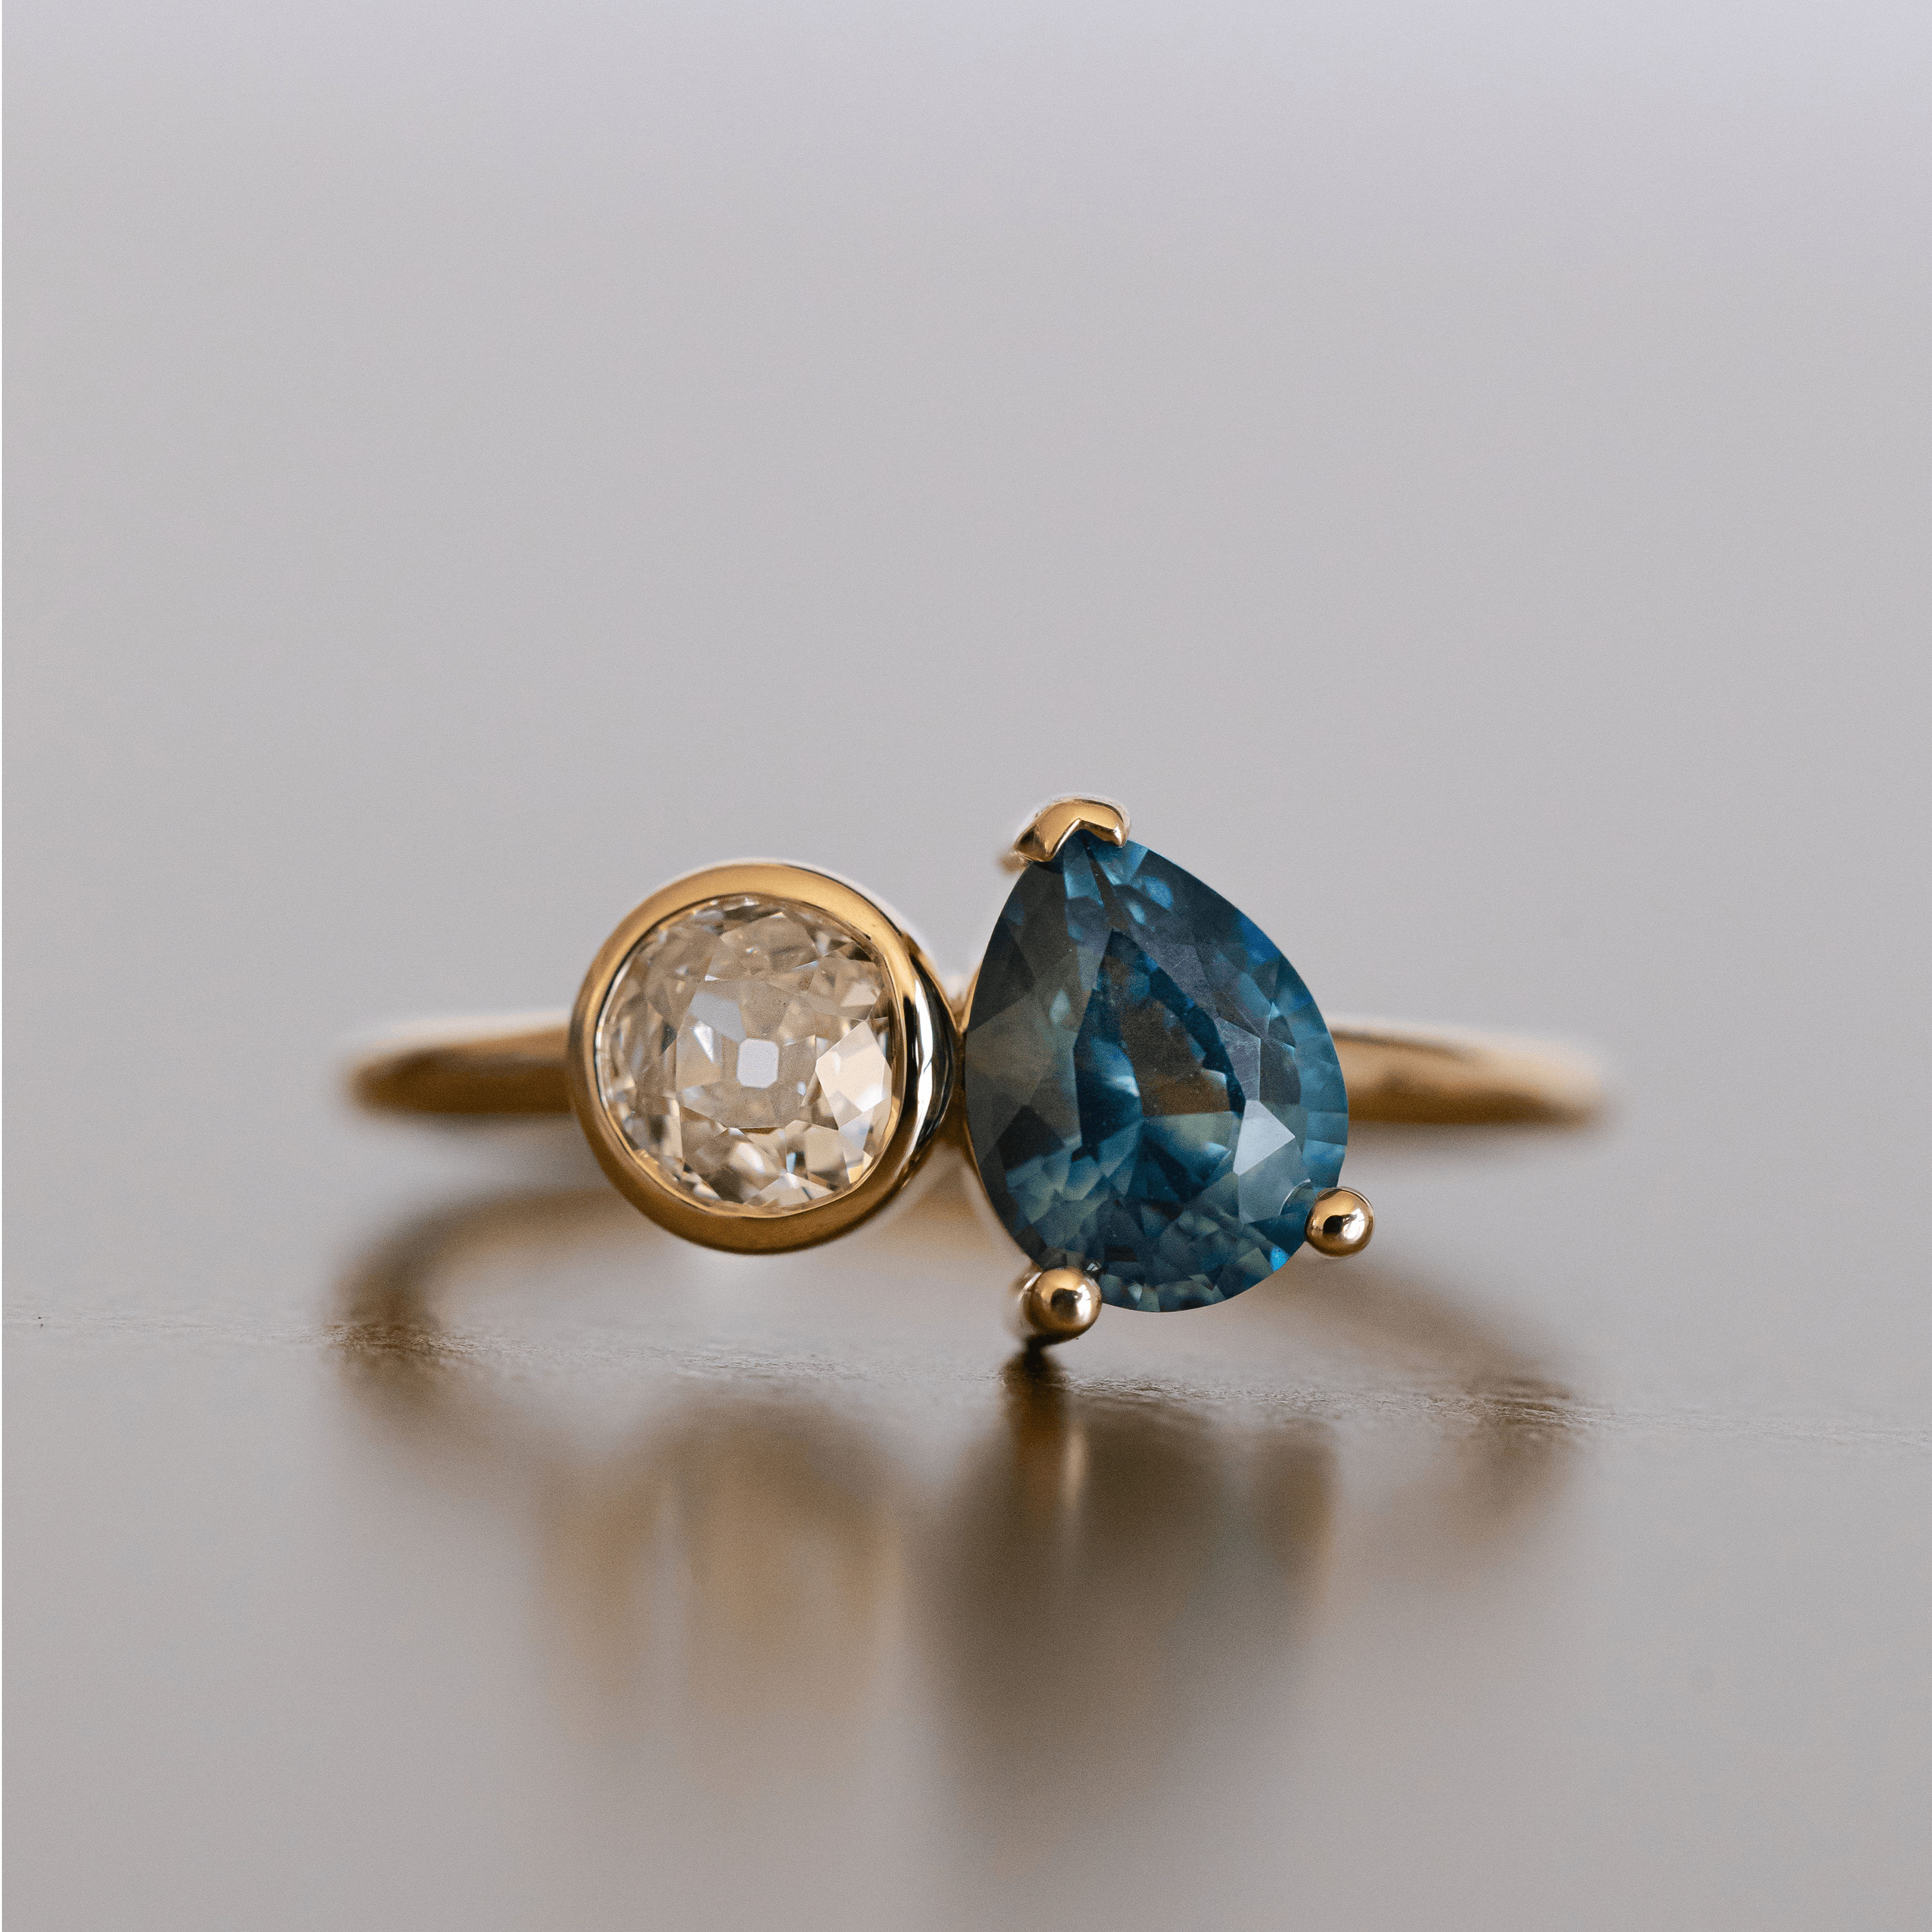 Australian Parti Sapphire in Engagement Rings | Sydney Jewellers